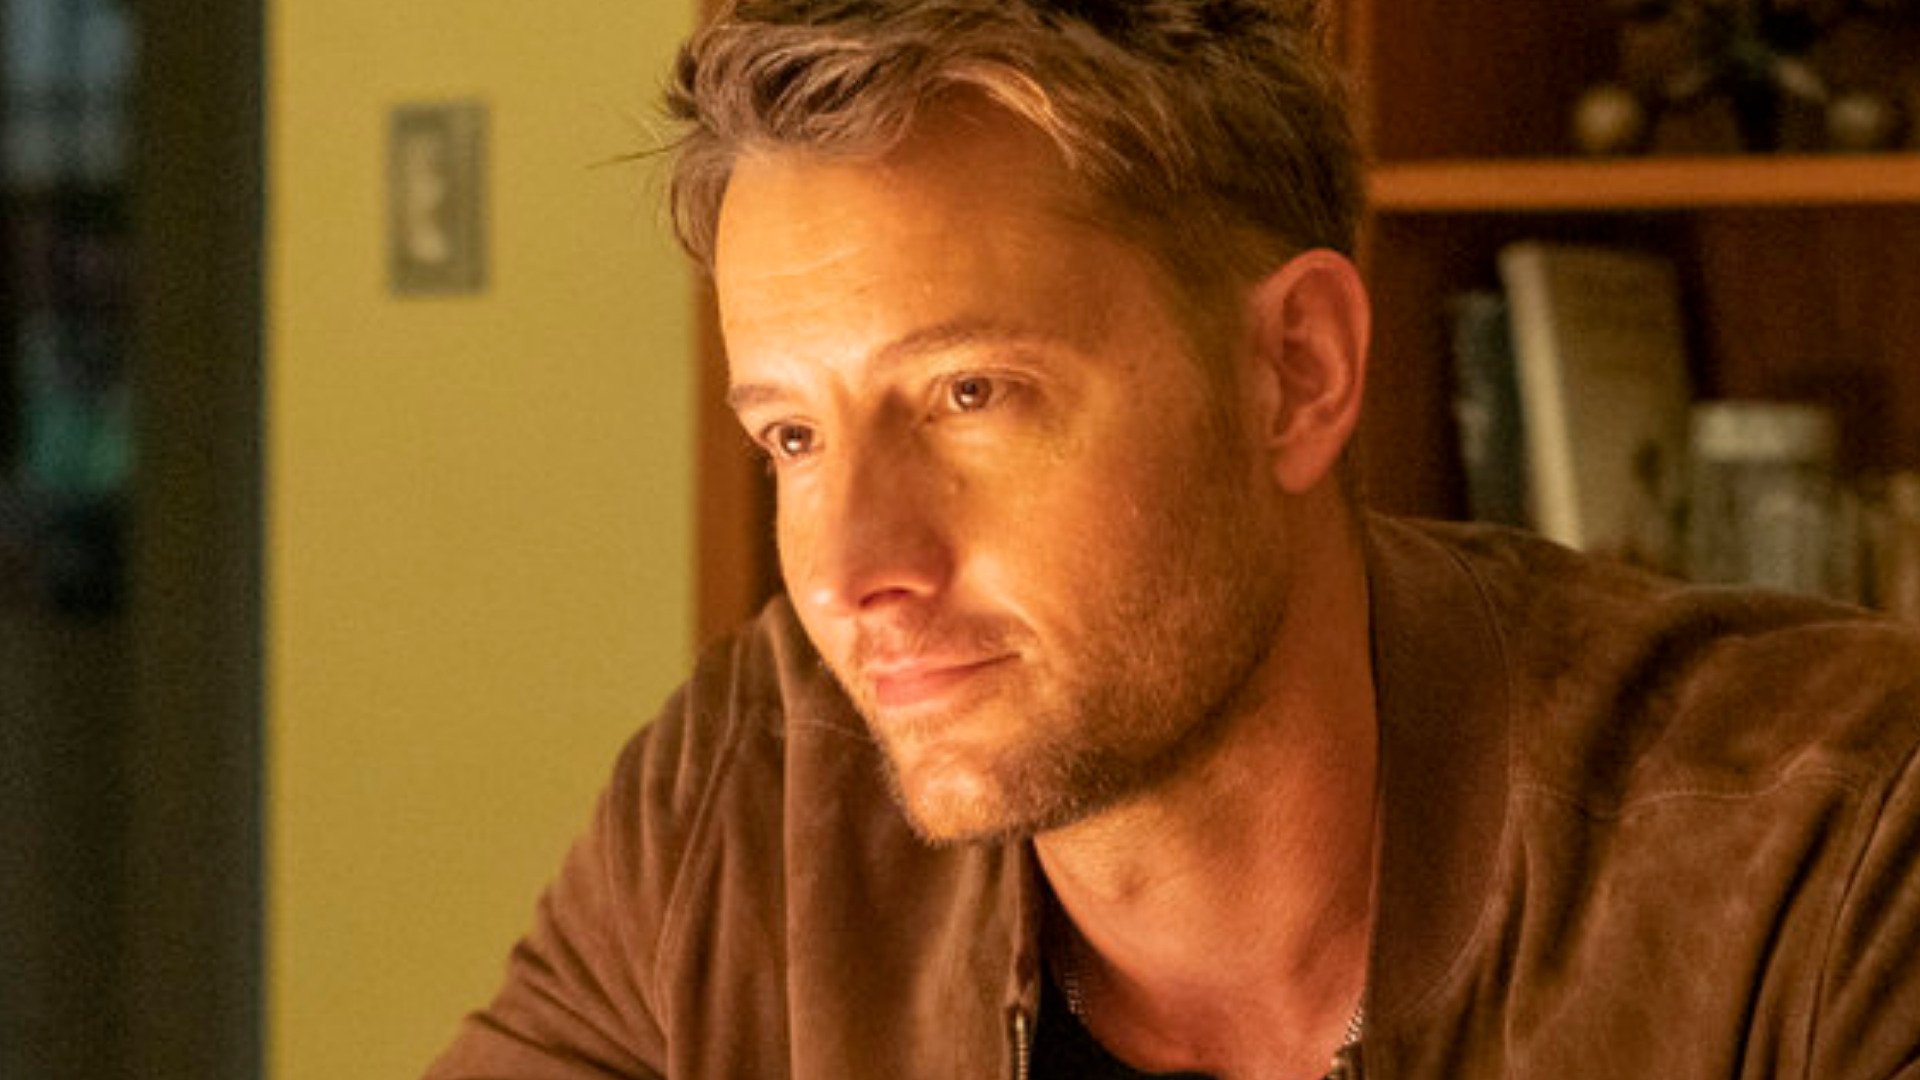 Justin Hartley as Kevin smiling at Toby in ‘This Is Us’ Season 6 Episode 3, ‘Four Fathers’